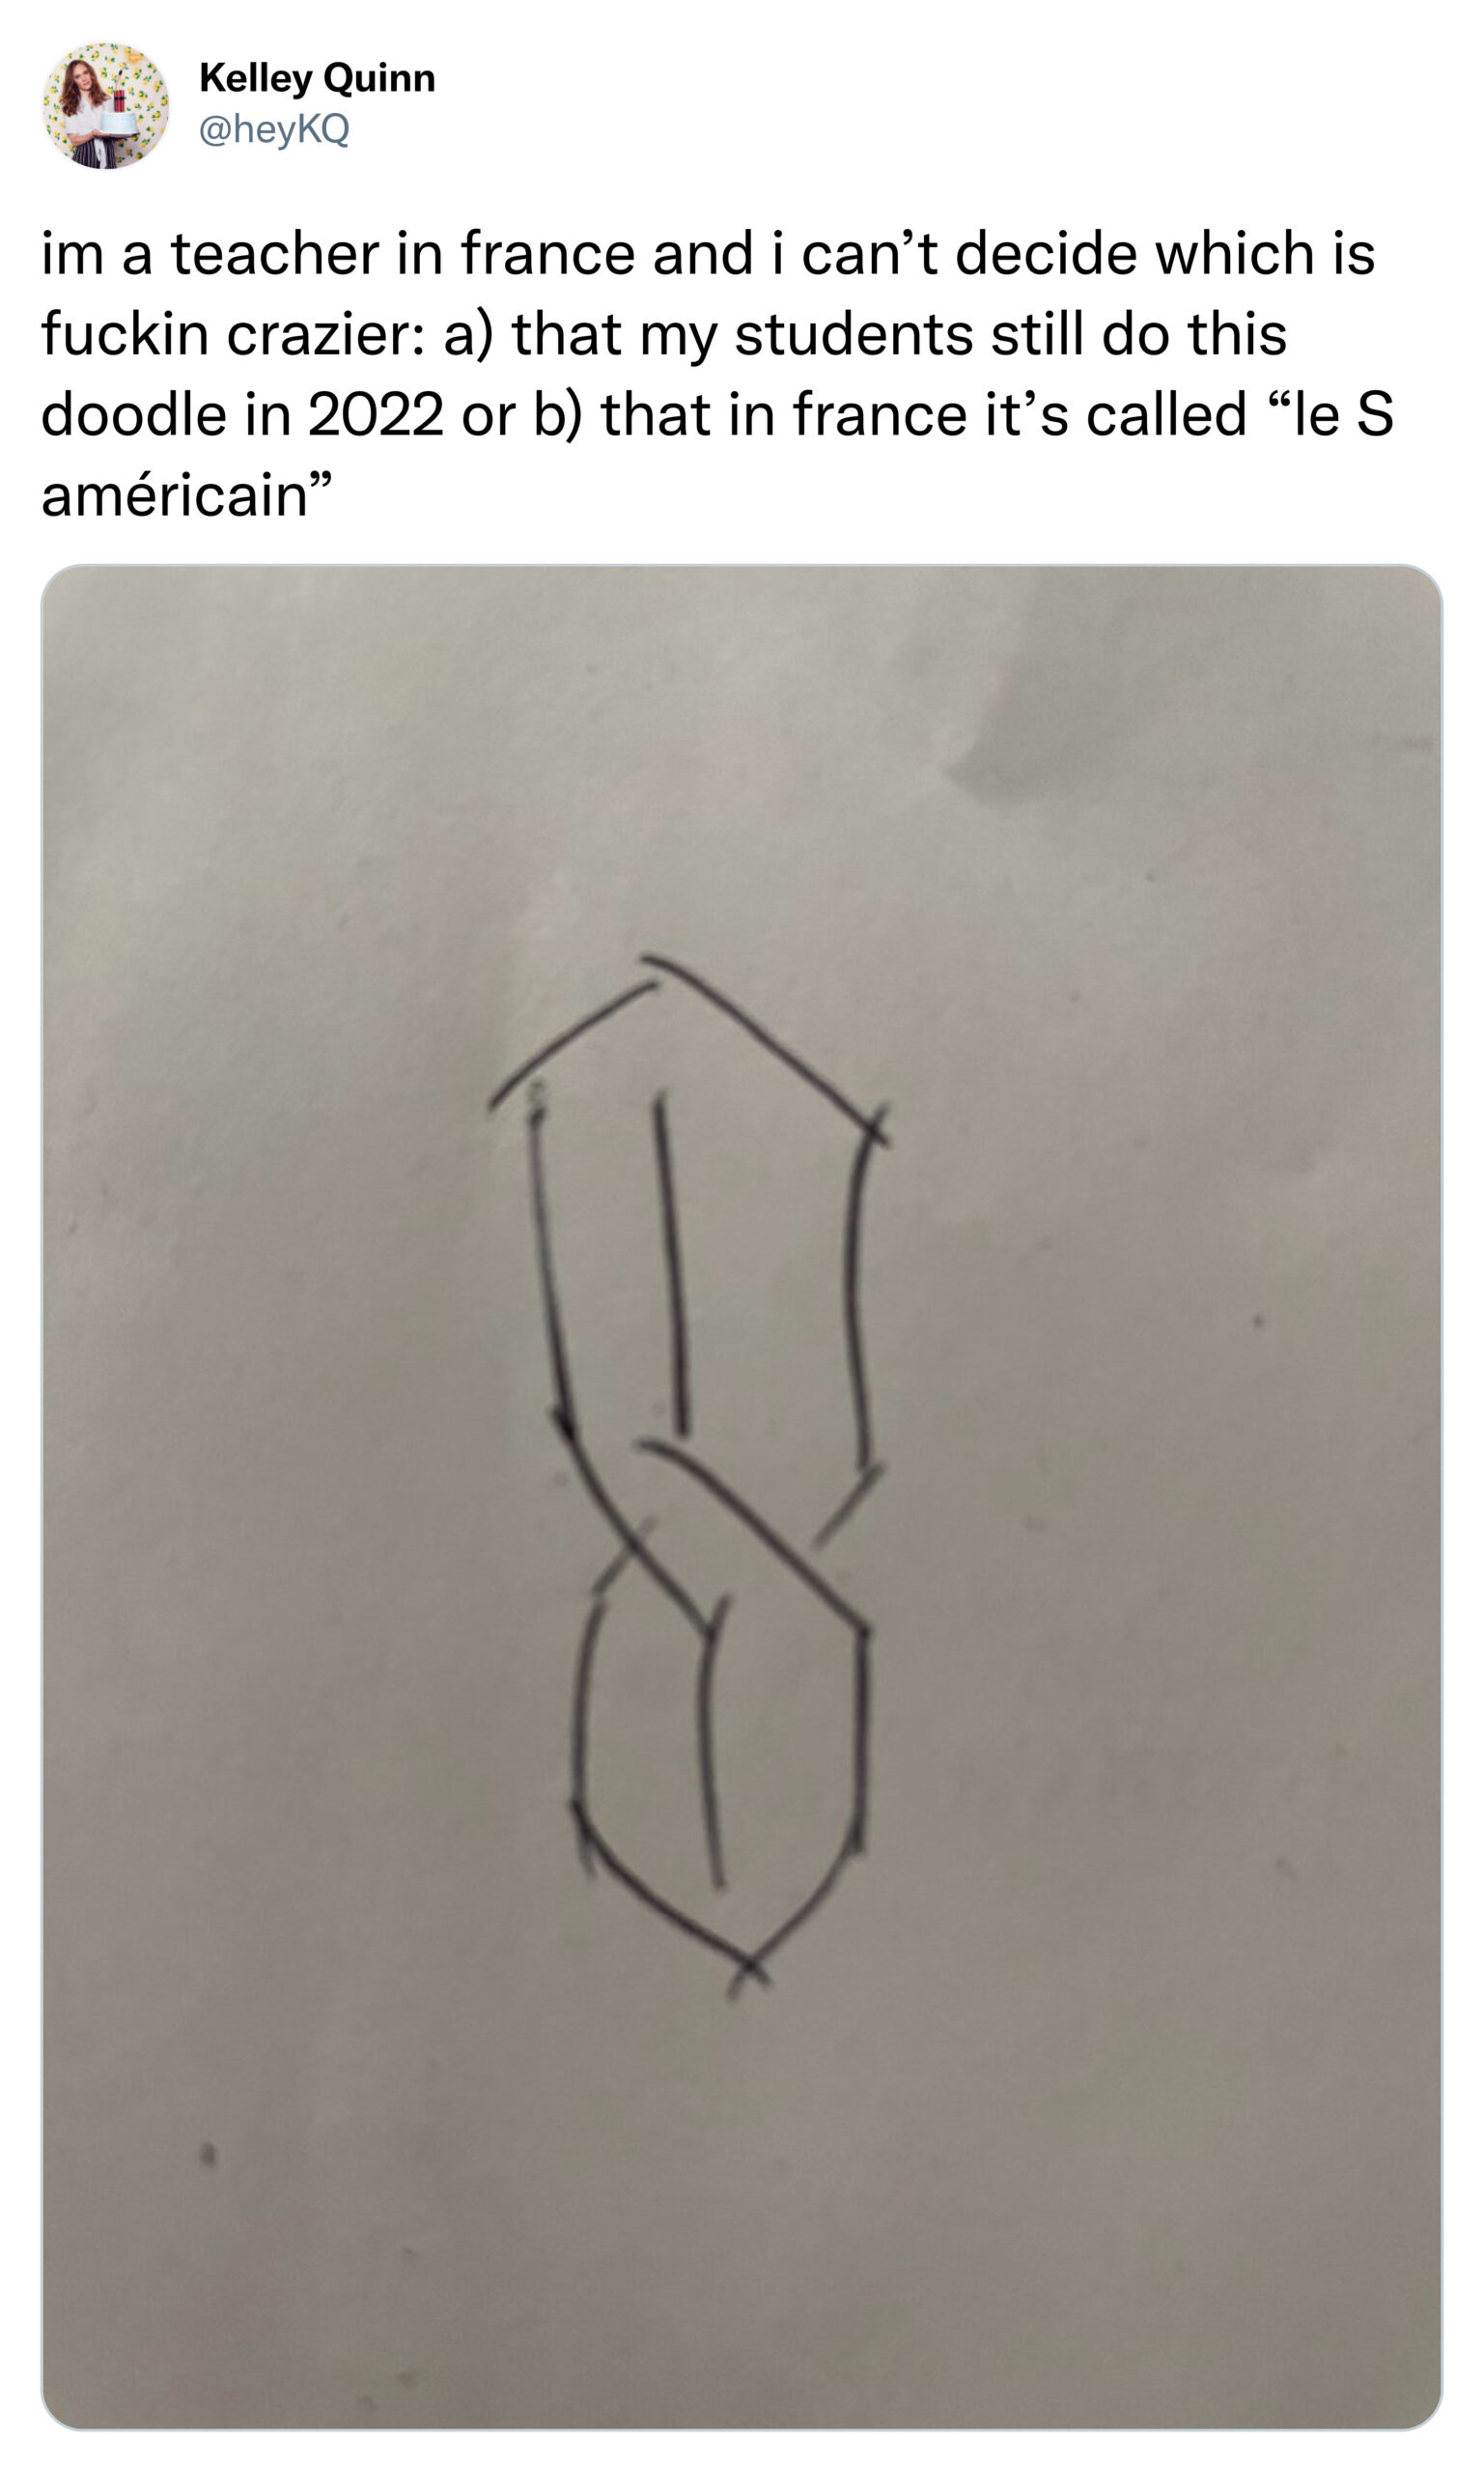 Funny Tweets - im a teacher in france and i can't decide which is fuckin crazier a that my students still do this doodle in 2022 or b that in france it's called le S amricain